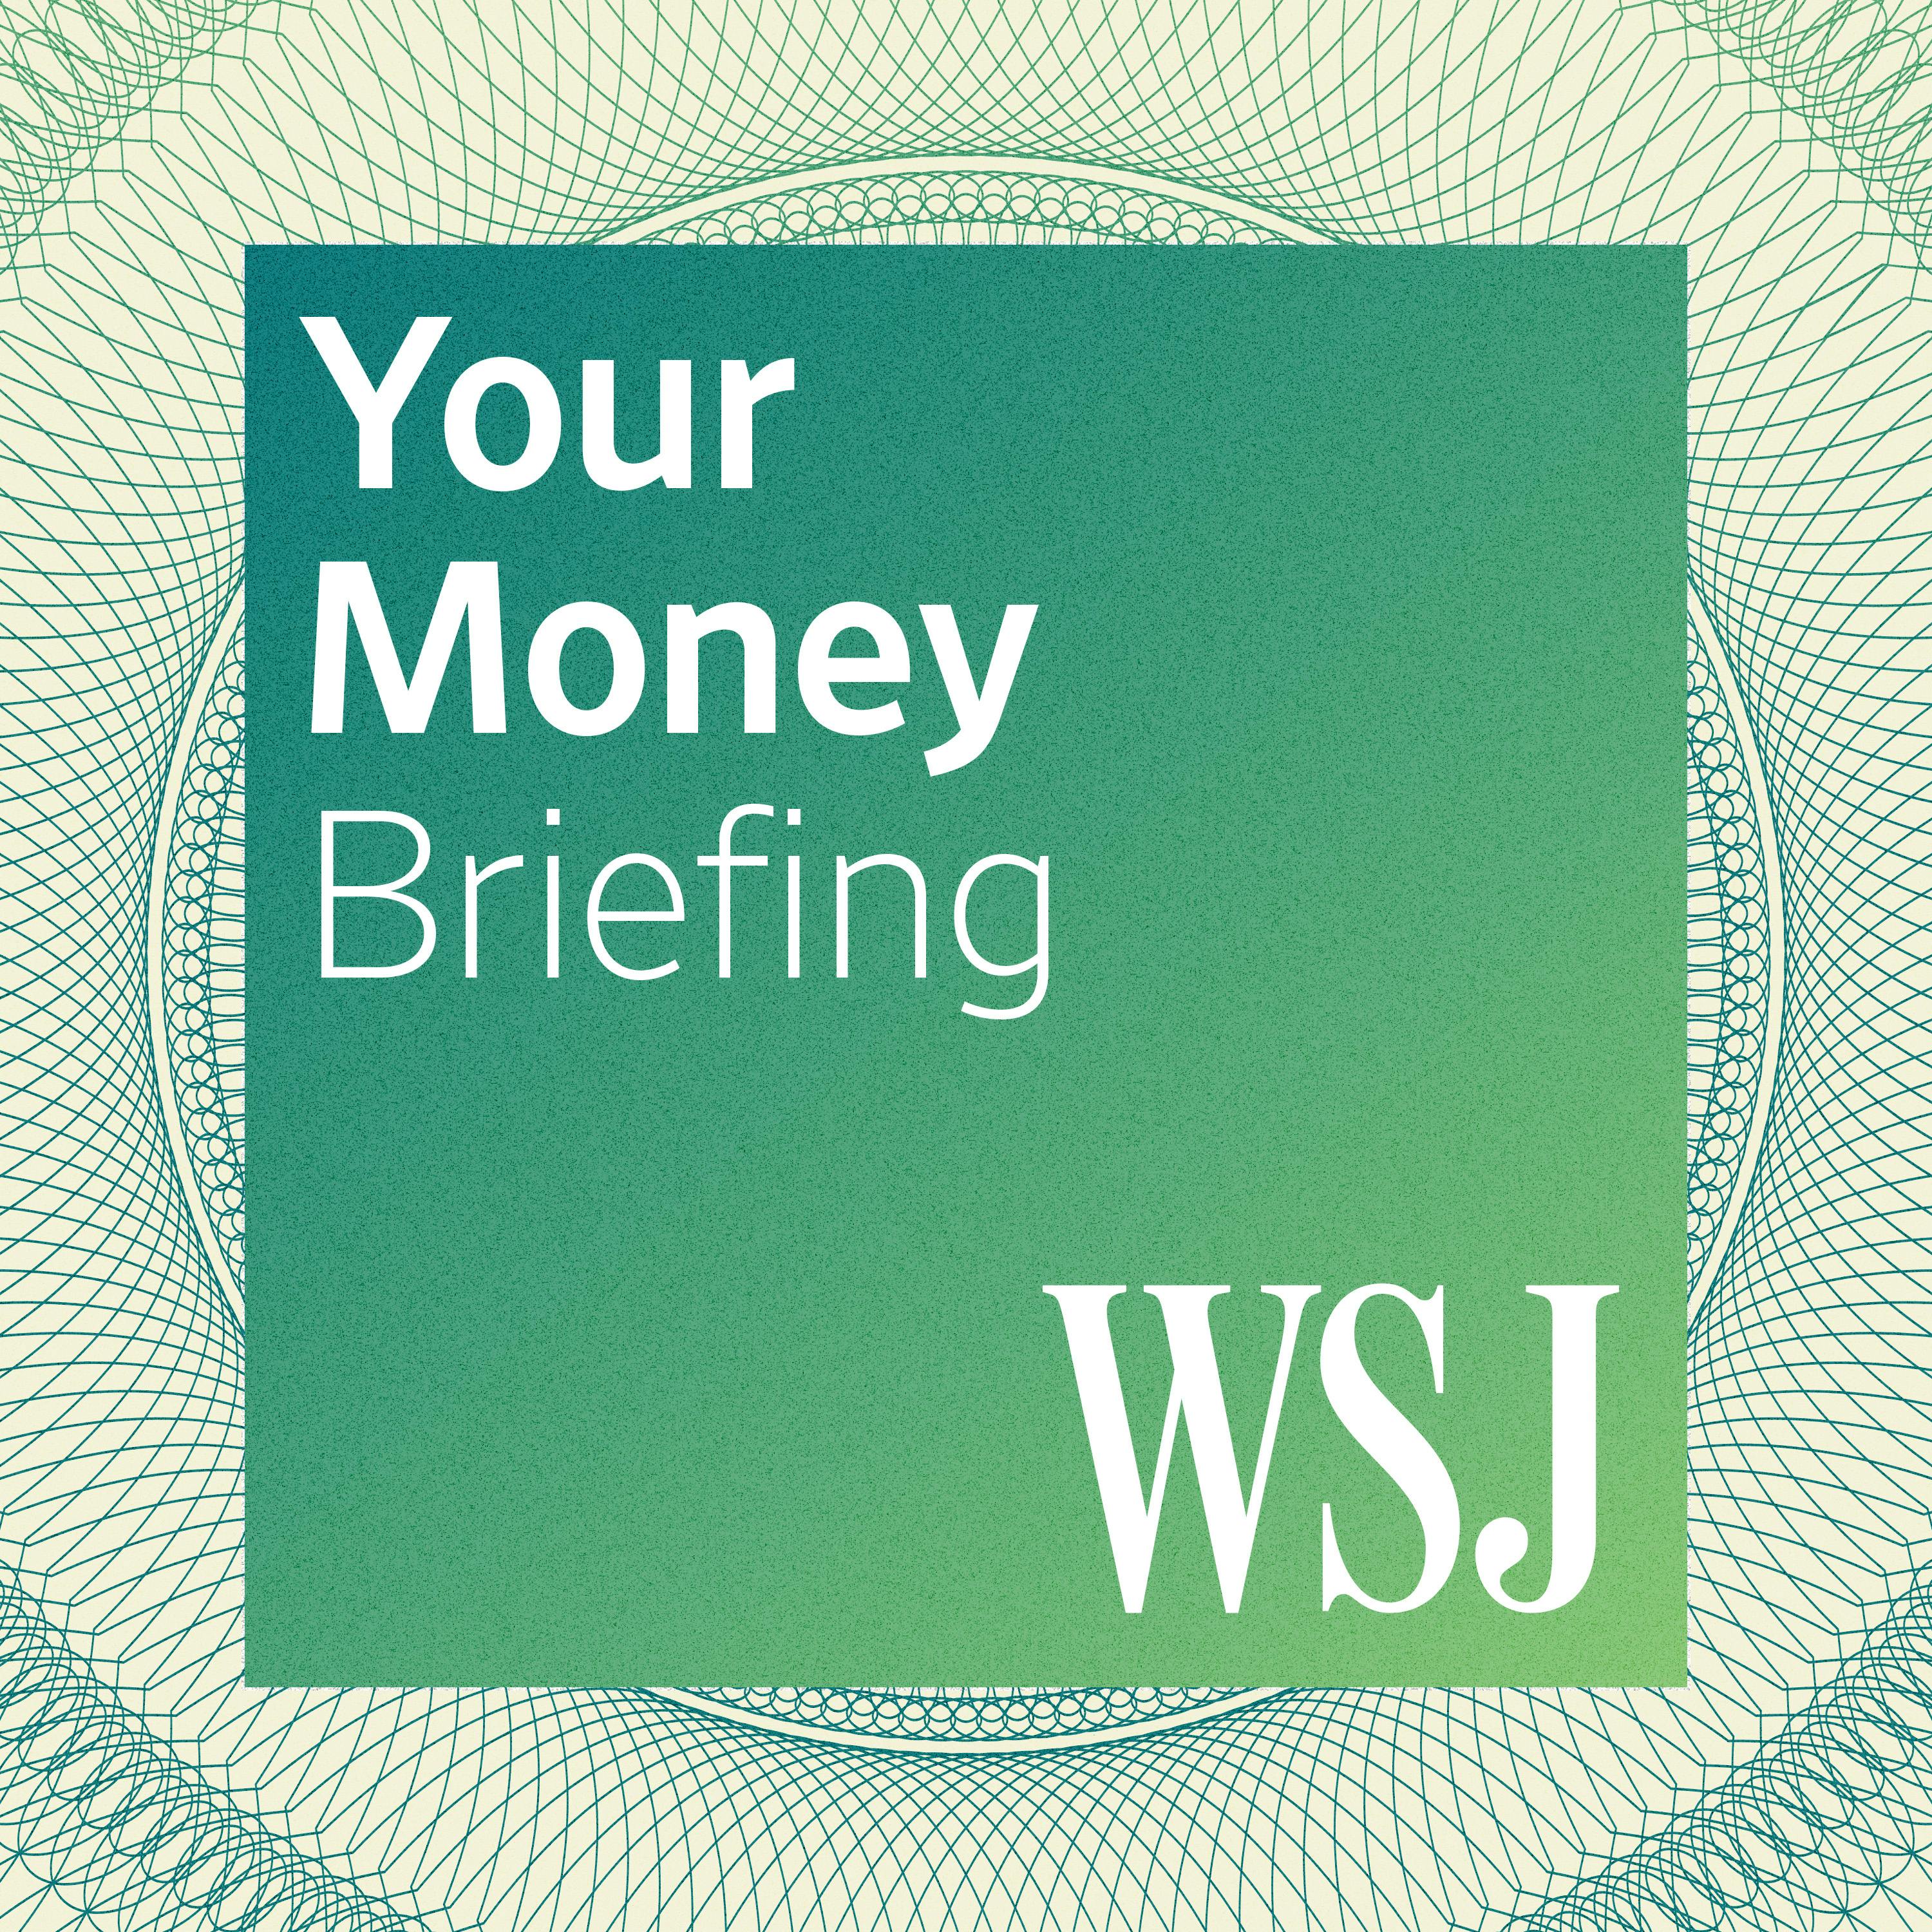 WSJ Your Money Briefing podcast